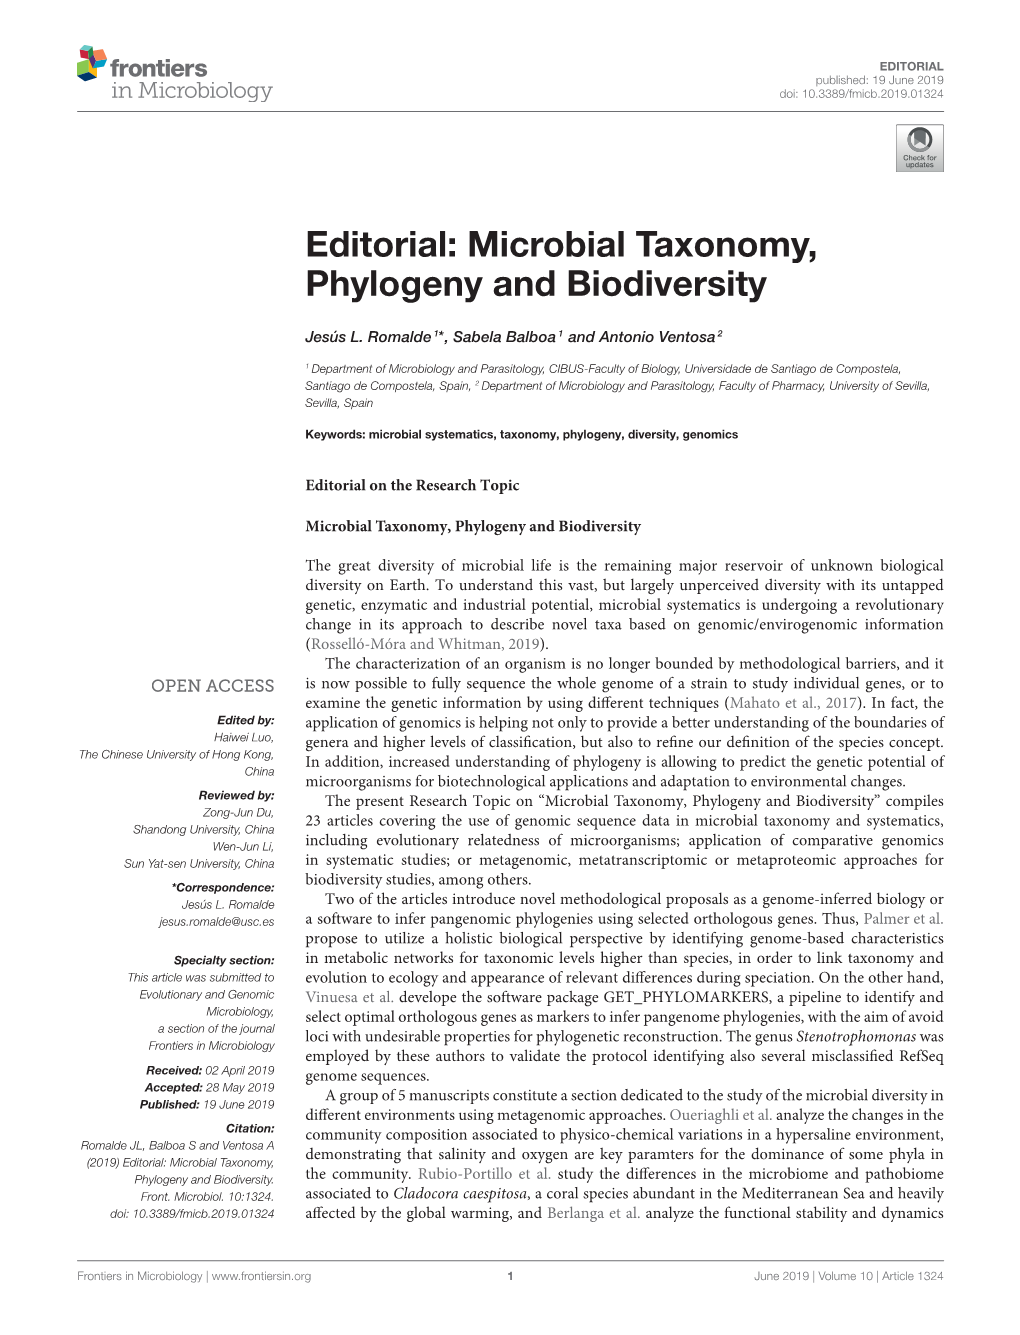 Editorial: Microbial Taxonomy, Phylogeny and Biodiversity